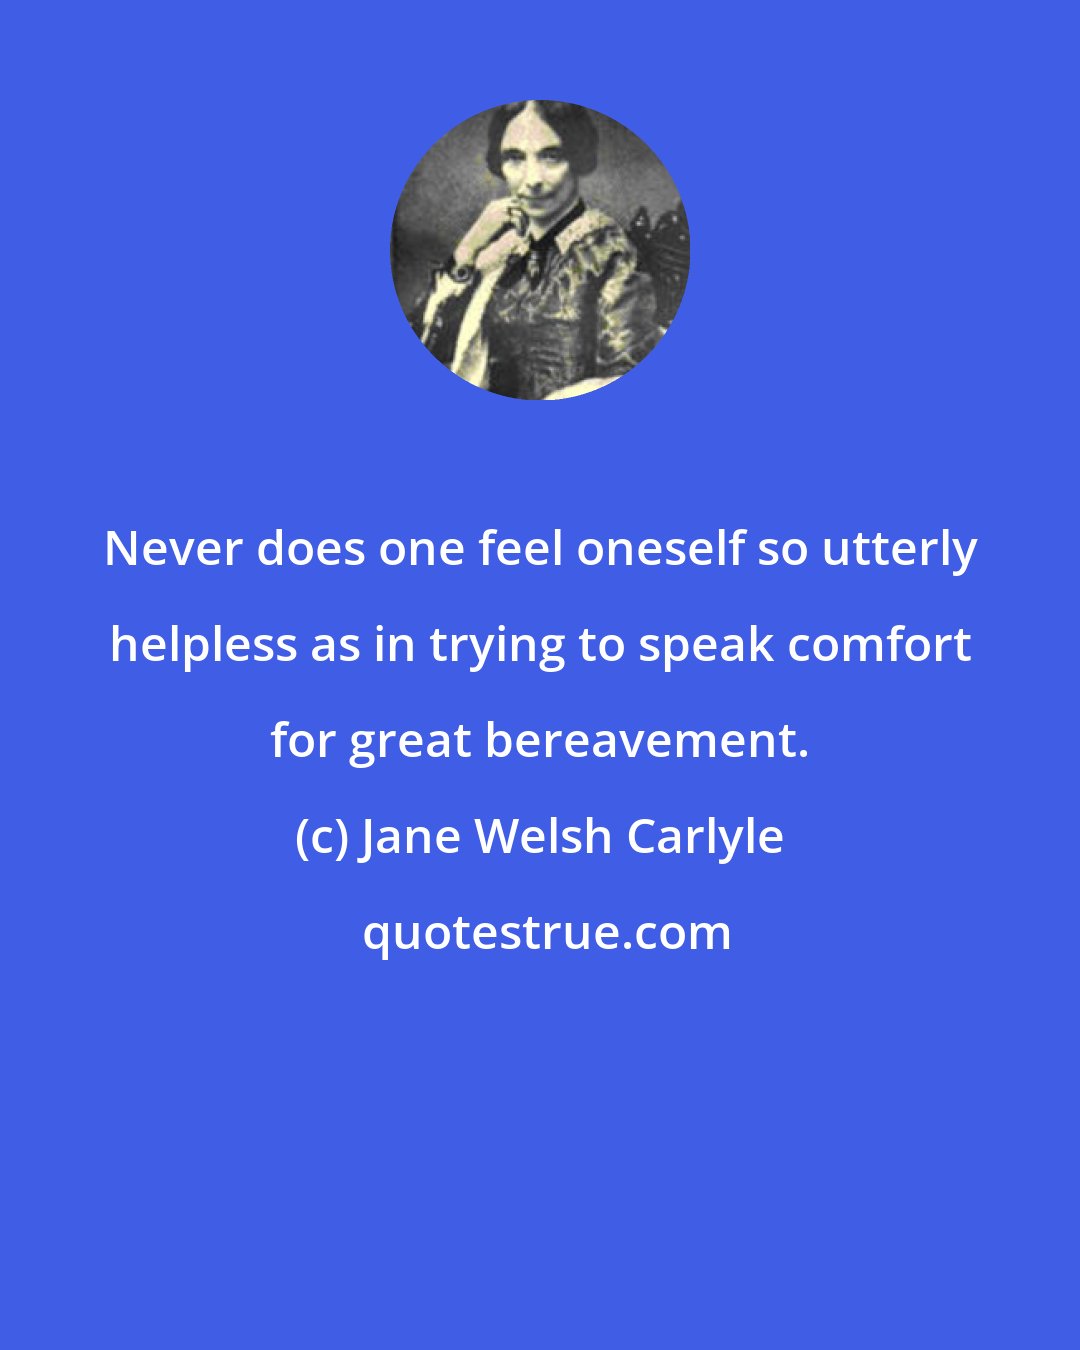 Jane Welsh Carlyle: Never does one feel oneself so utterly helpless as in trying to speak comfort for great bereavement.